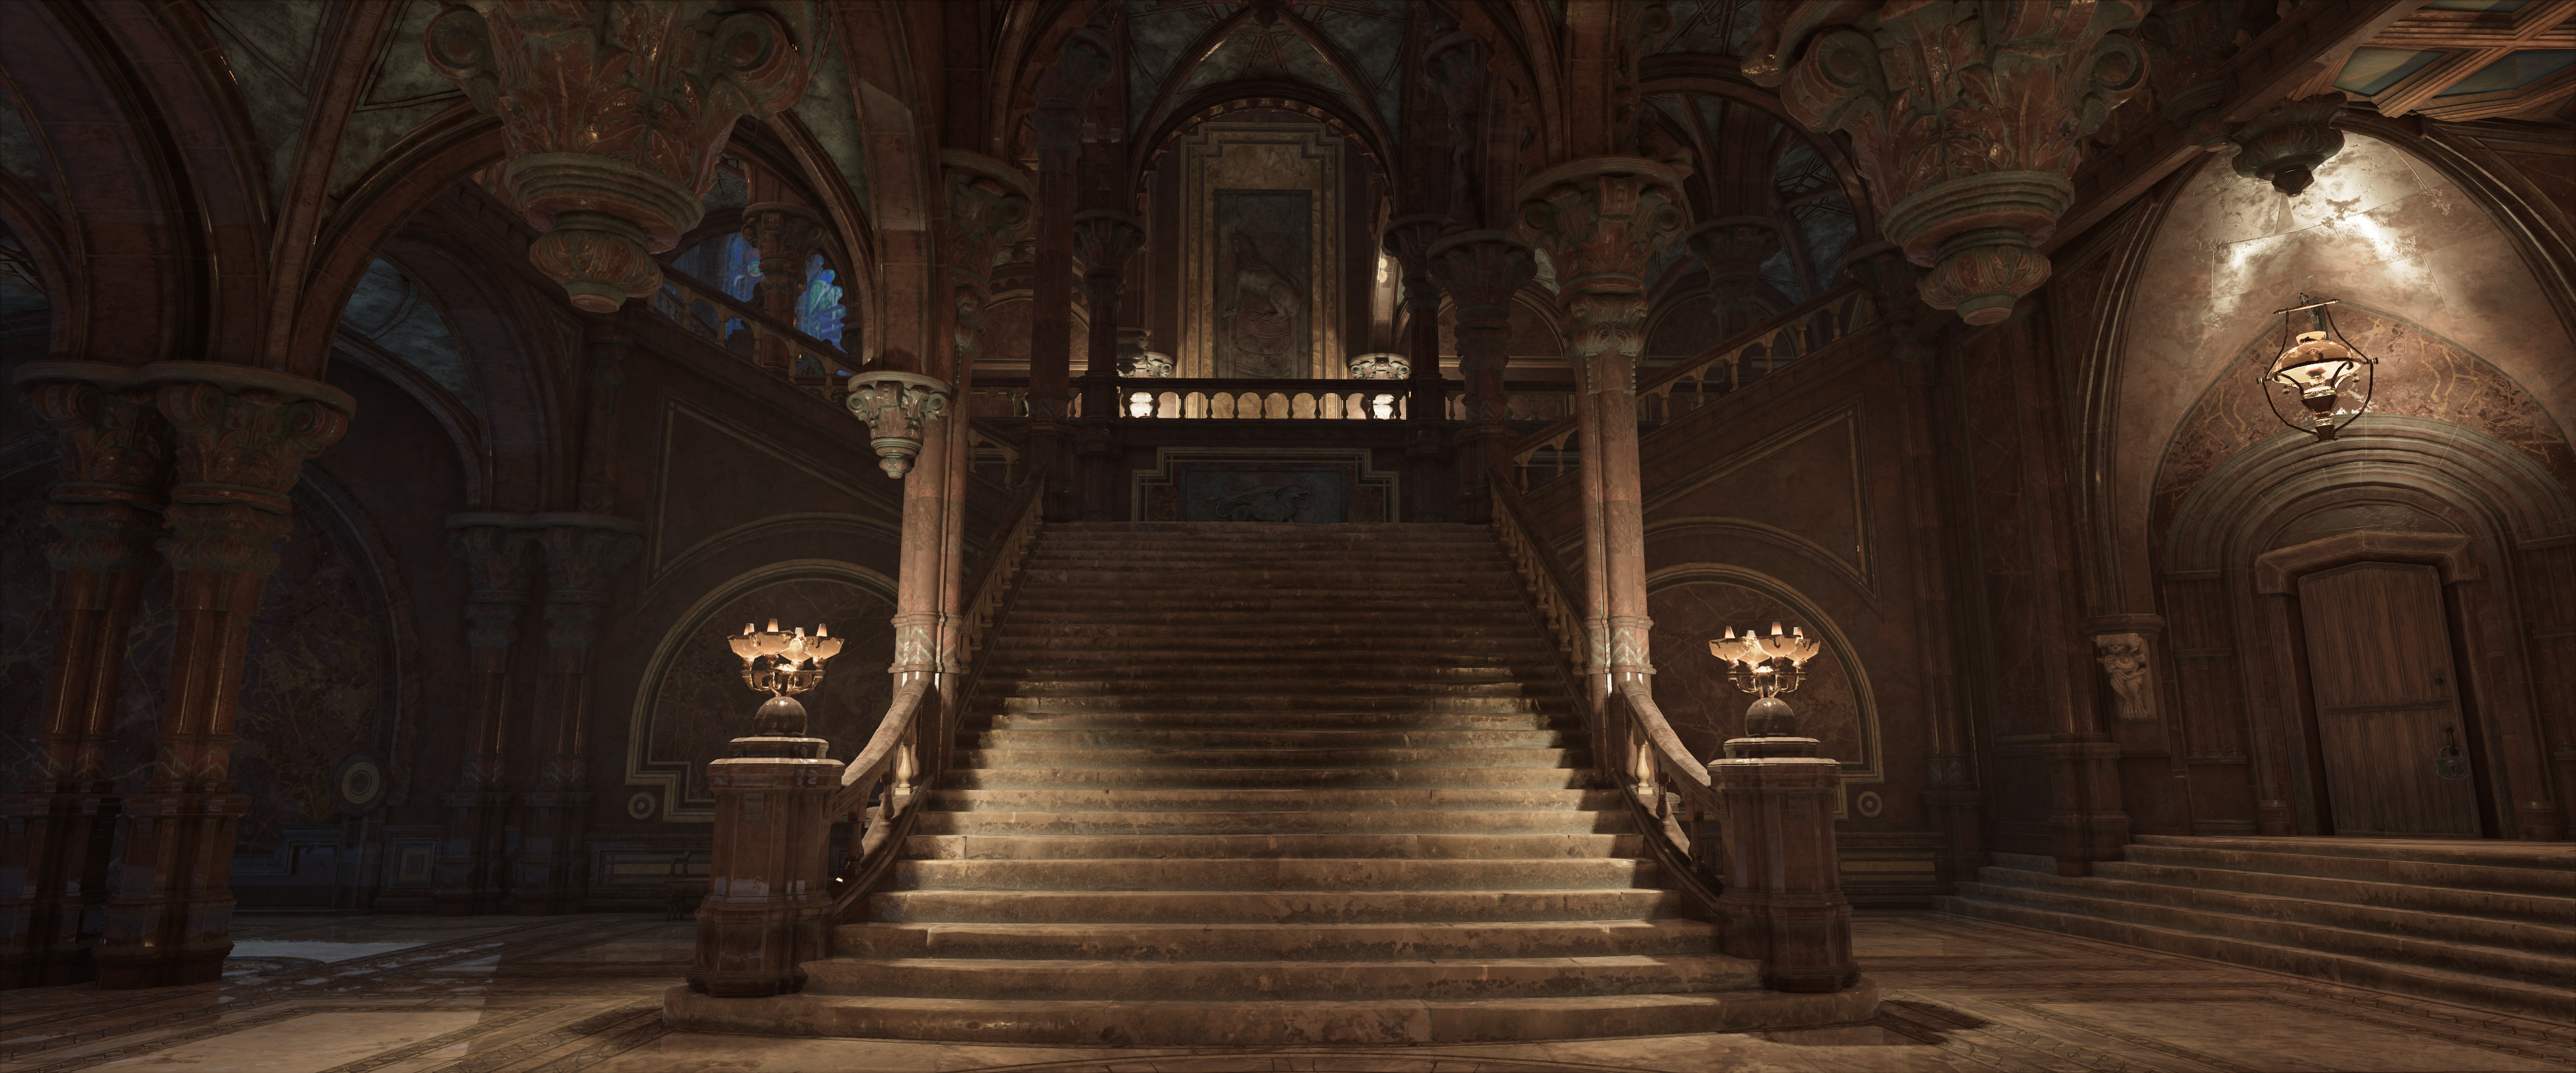 General 3840x1600 Hogwarts Legacy Castle interior screen shot video games stairs CGI interior Avalanche Software